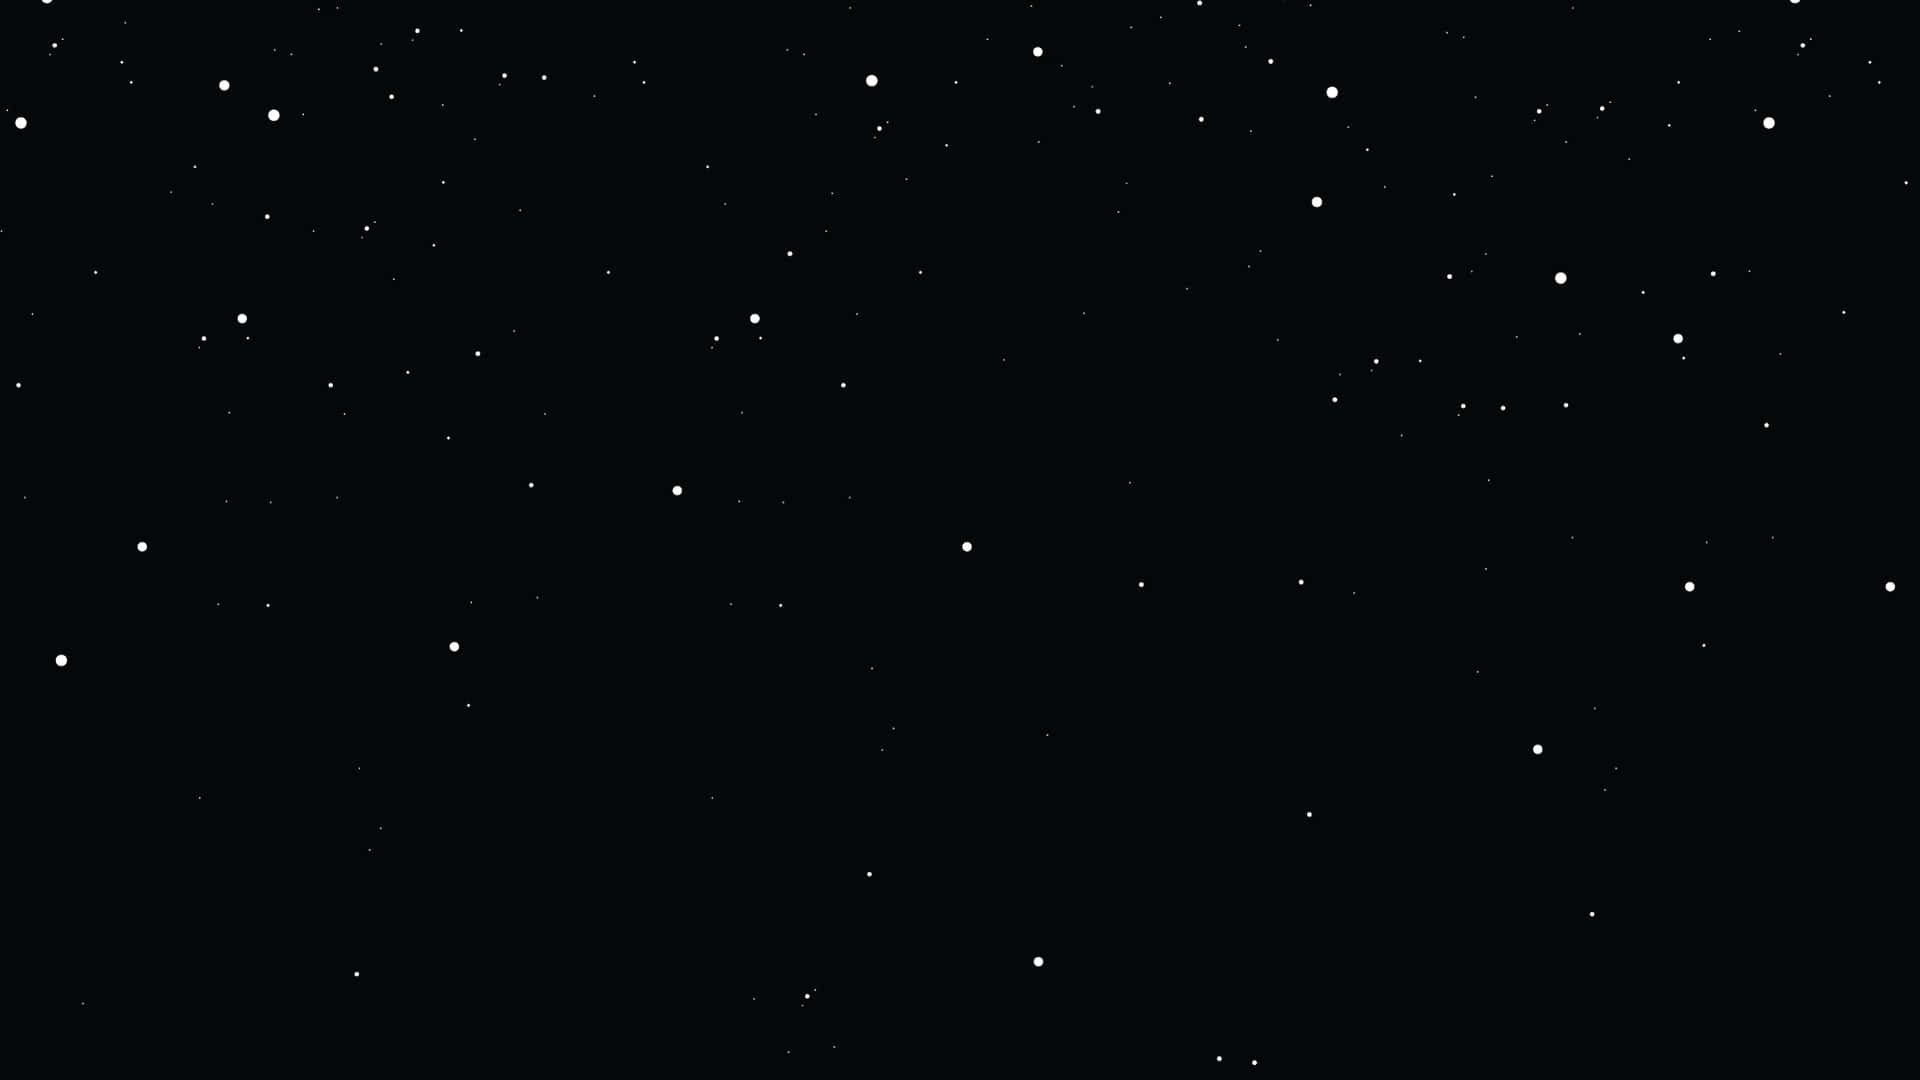 A Black Sky With Stars In The Sky